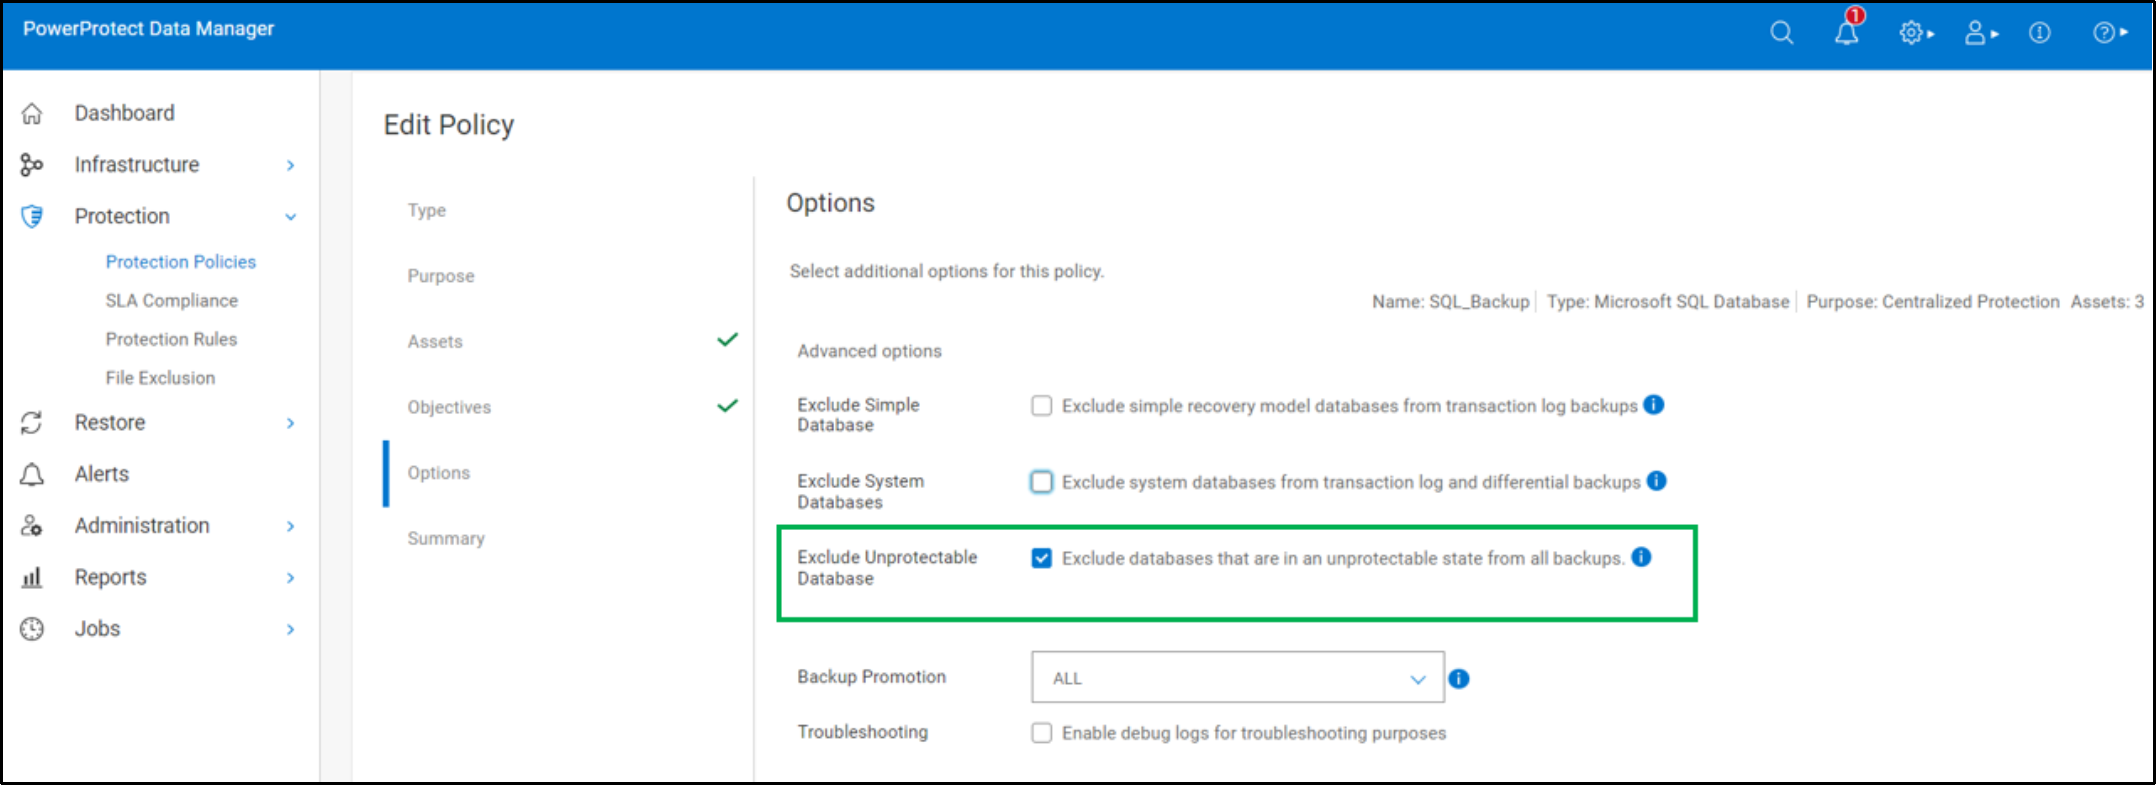 The image shows the protection policy option to exclude unprotectable Databases from backup.